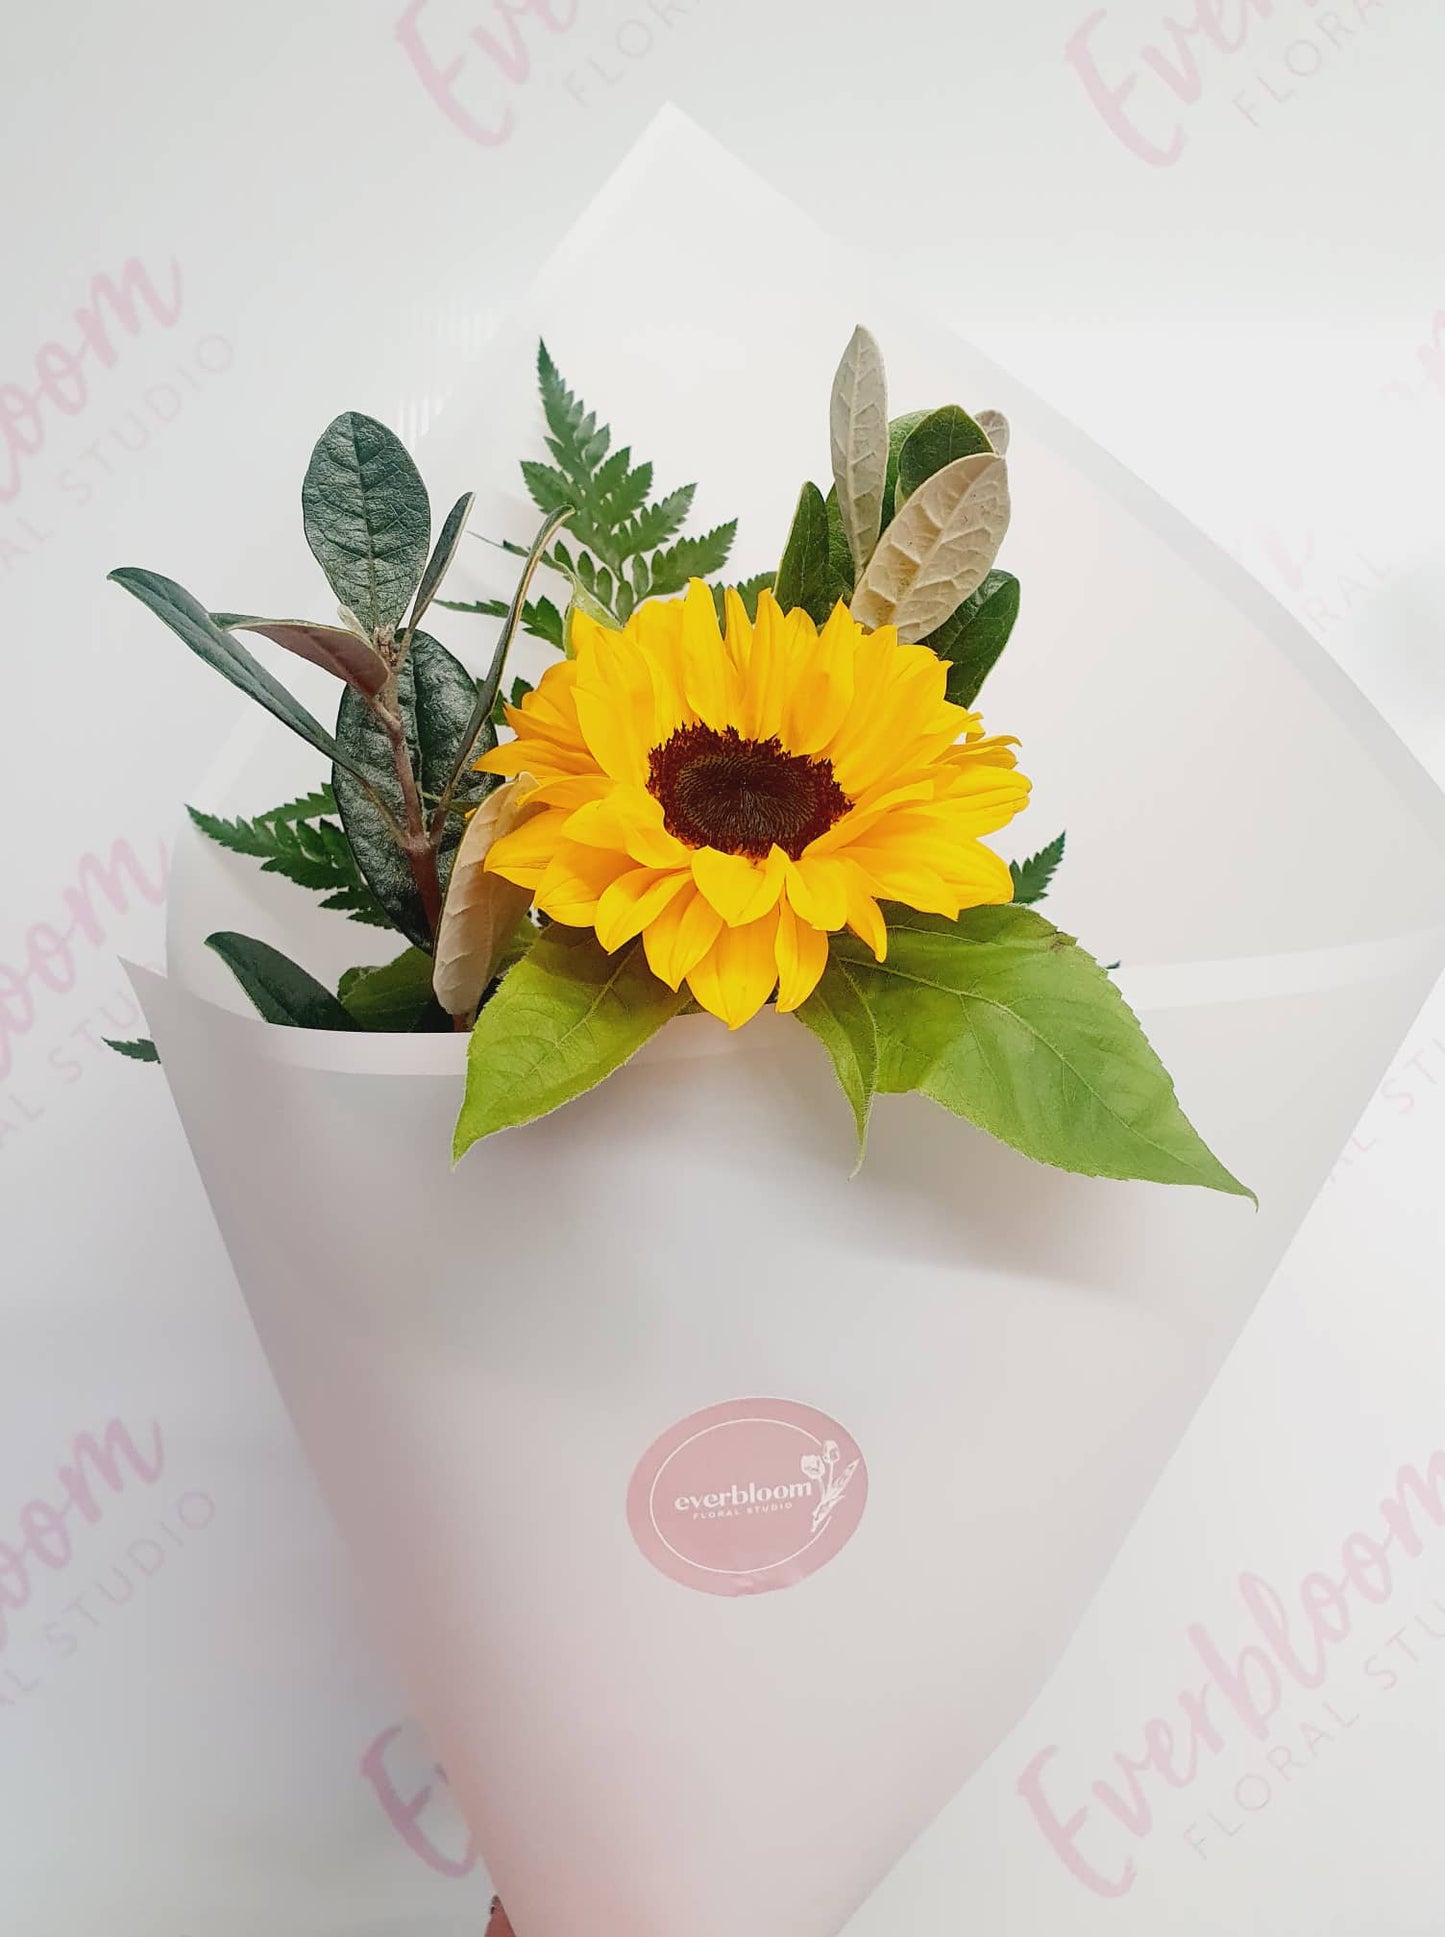 Single sunflowers are a great little gift to say thinking of you, get well, or simply to put a smile on someones face. Offering same day flower delivery to Mount Maunganui, Papamoa and Tauranga. Everbloom floral studio your local bayfair florist nga. 